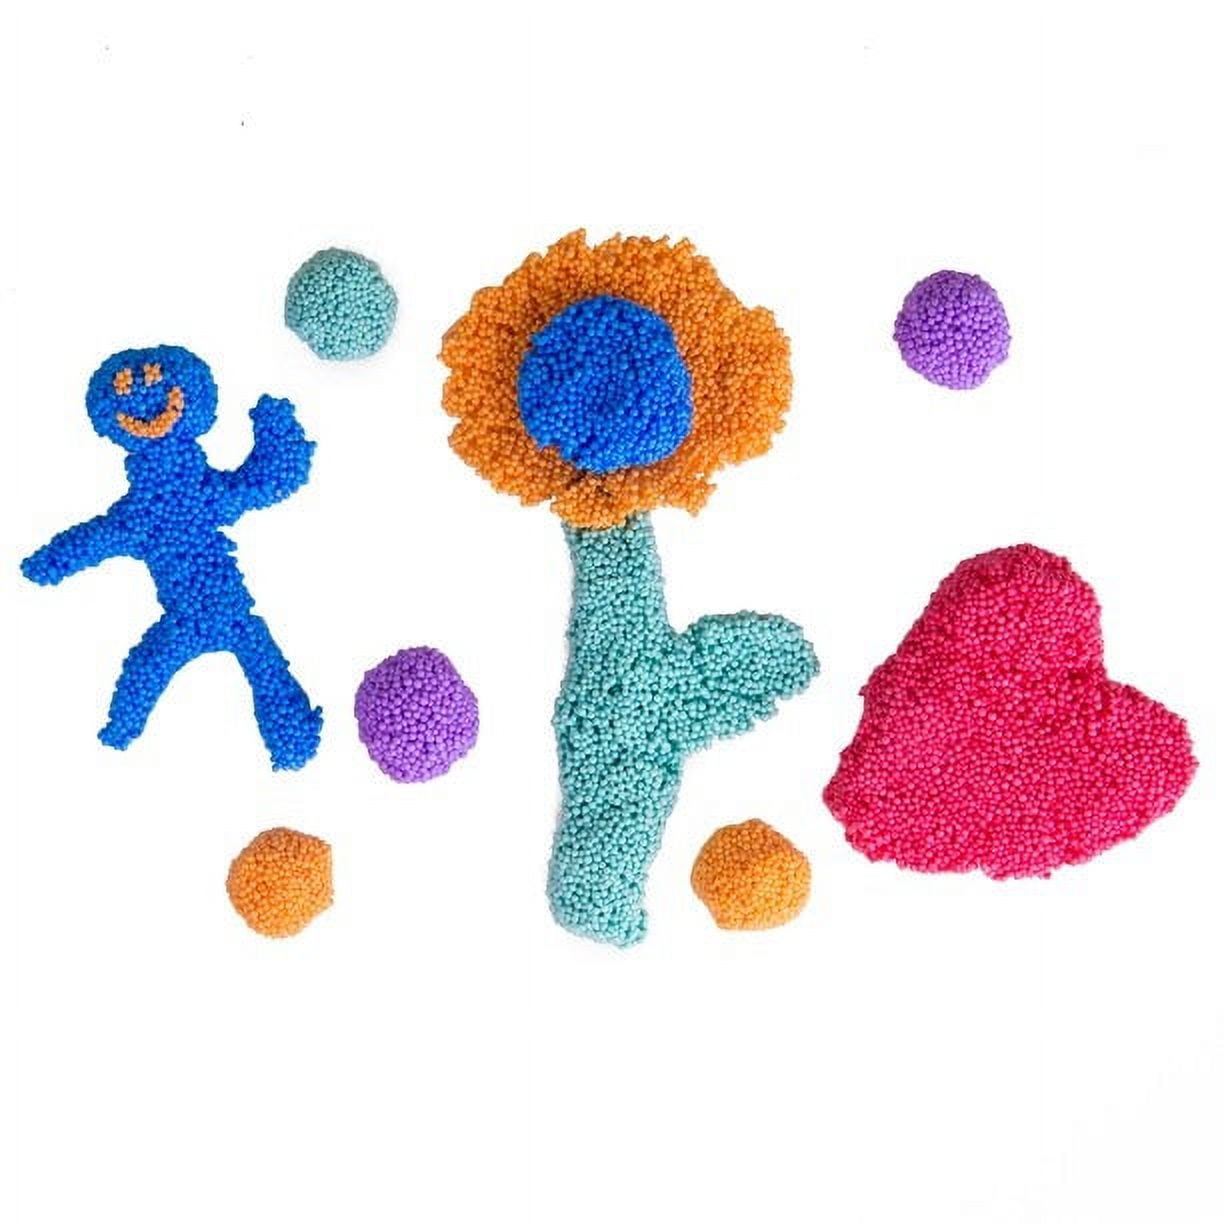 Book a fun foam clay sessions at our Crafty Monkey Studio